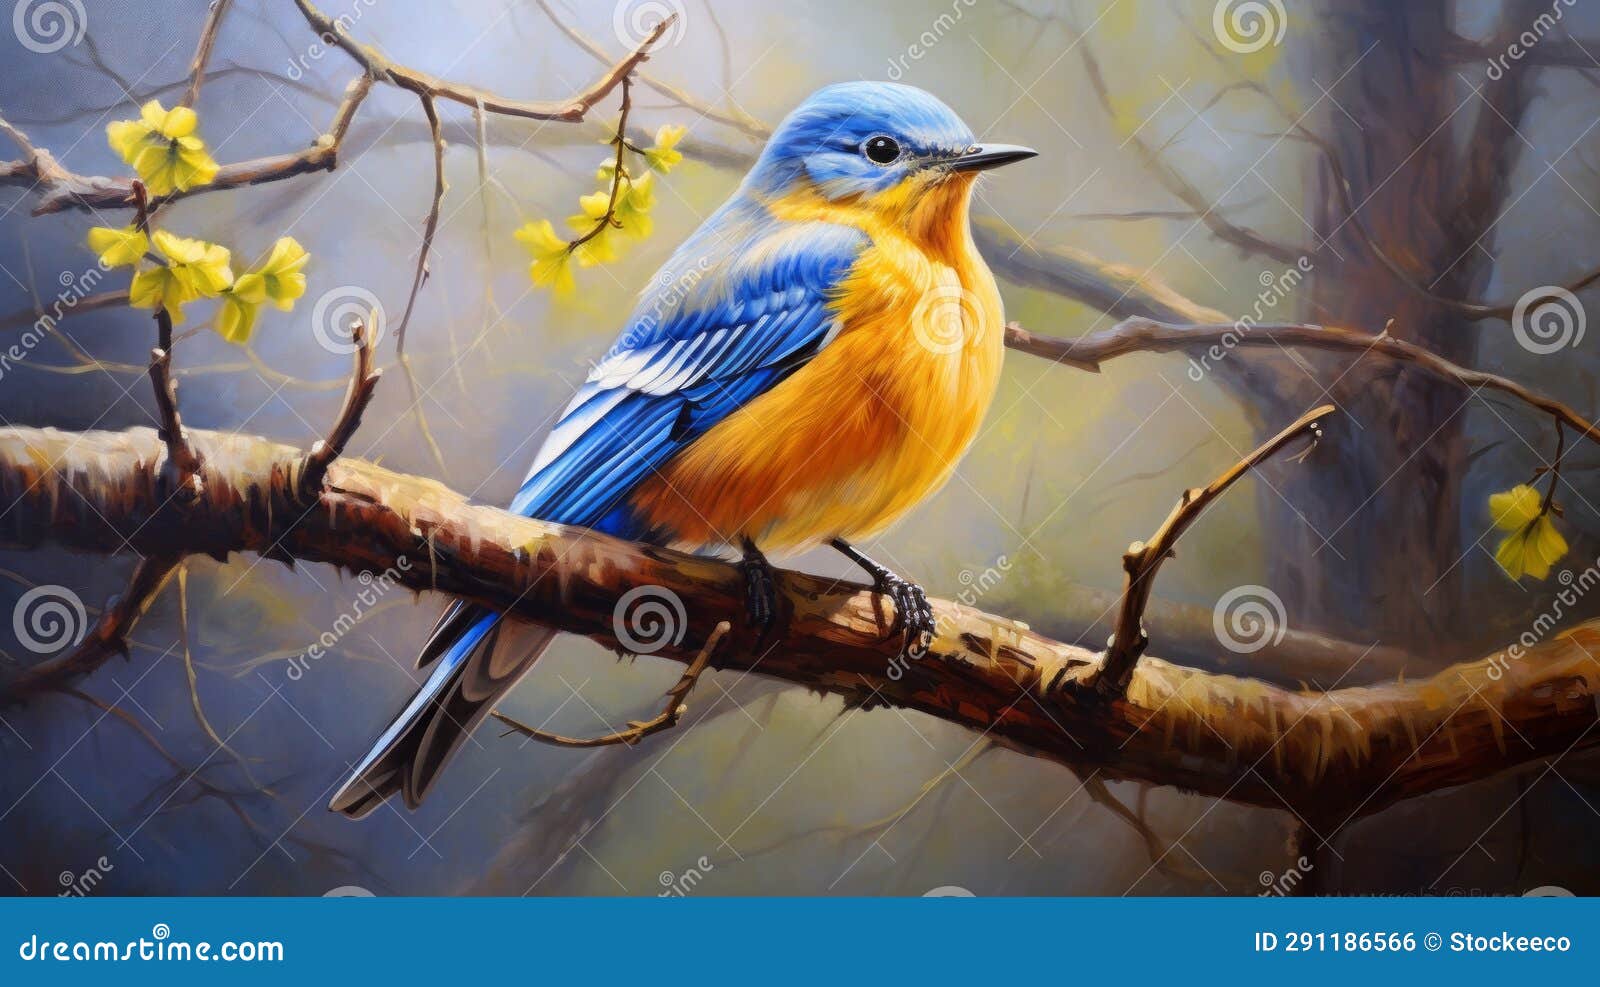 realistic painting of a blue bird on a branch